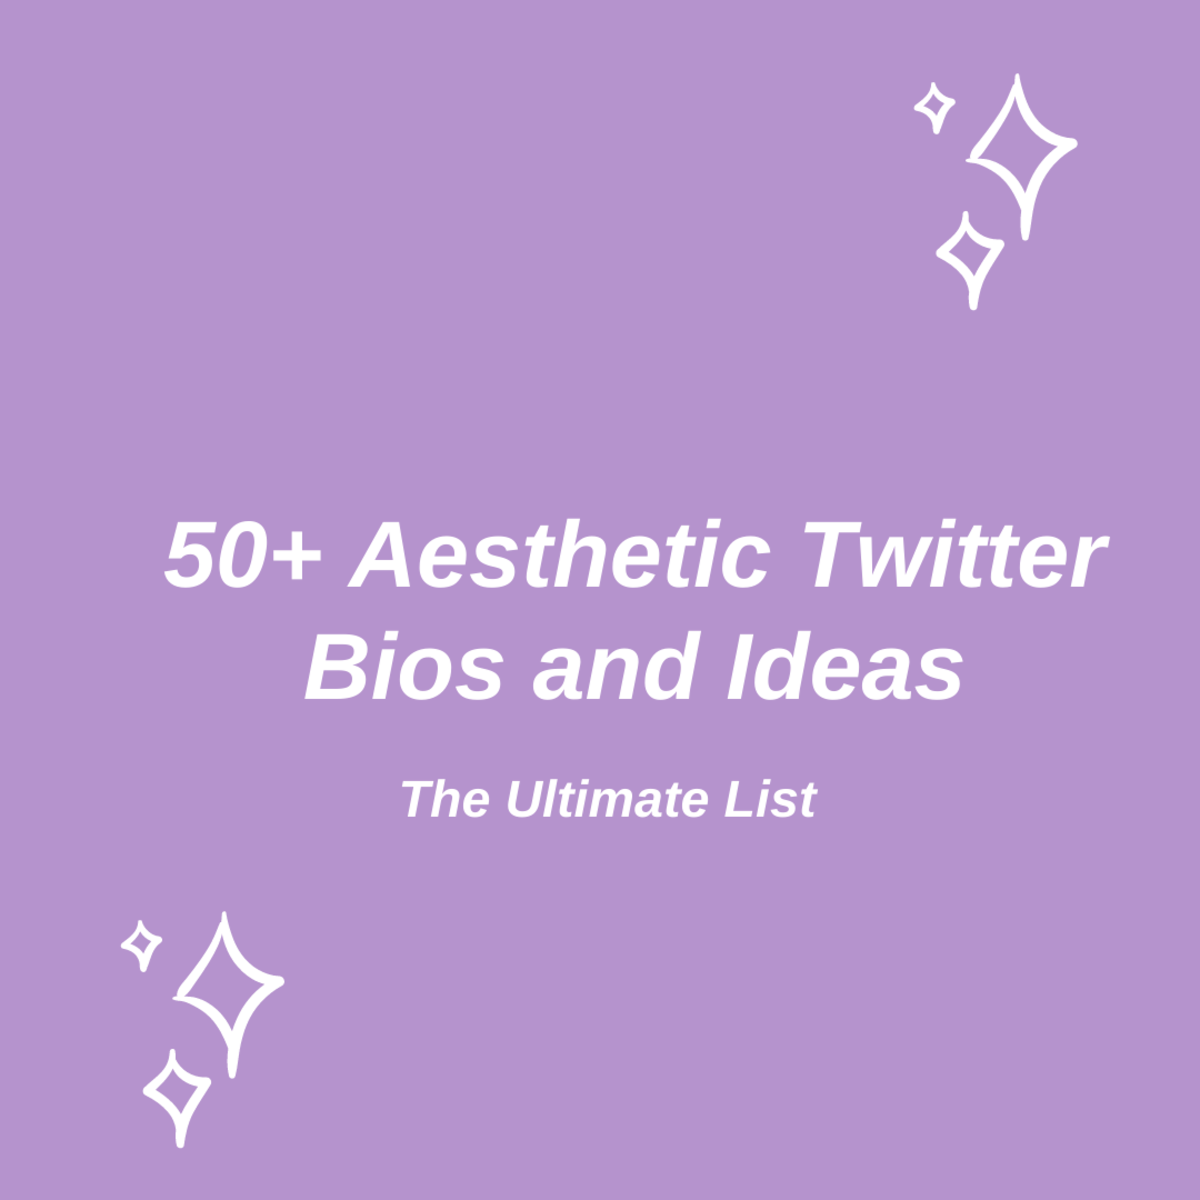 Discover over 50 aesthetic Twitter bios plus lots of inspiration too!